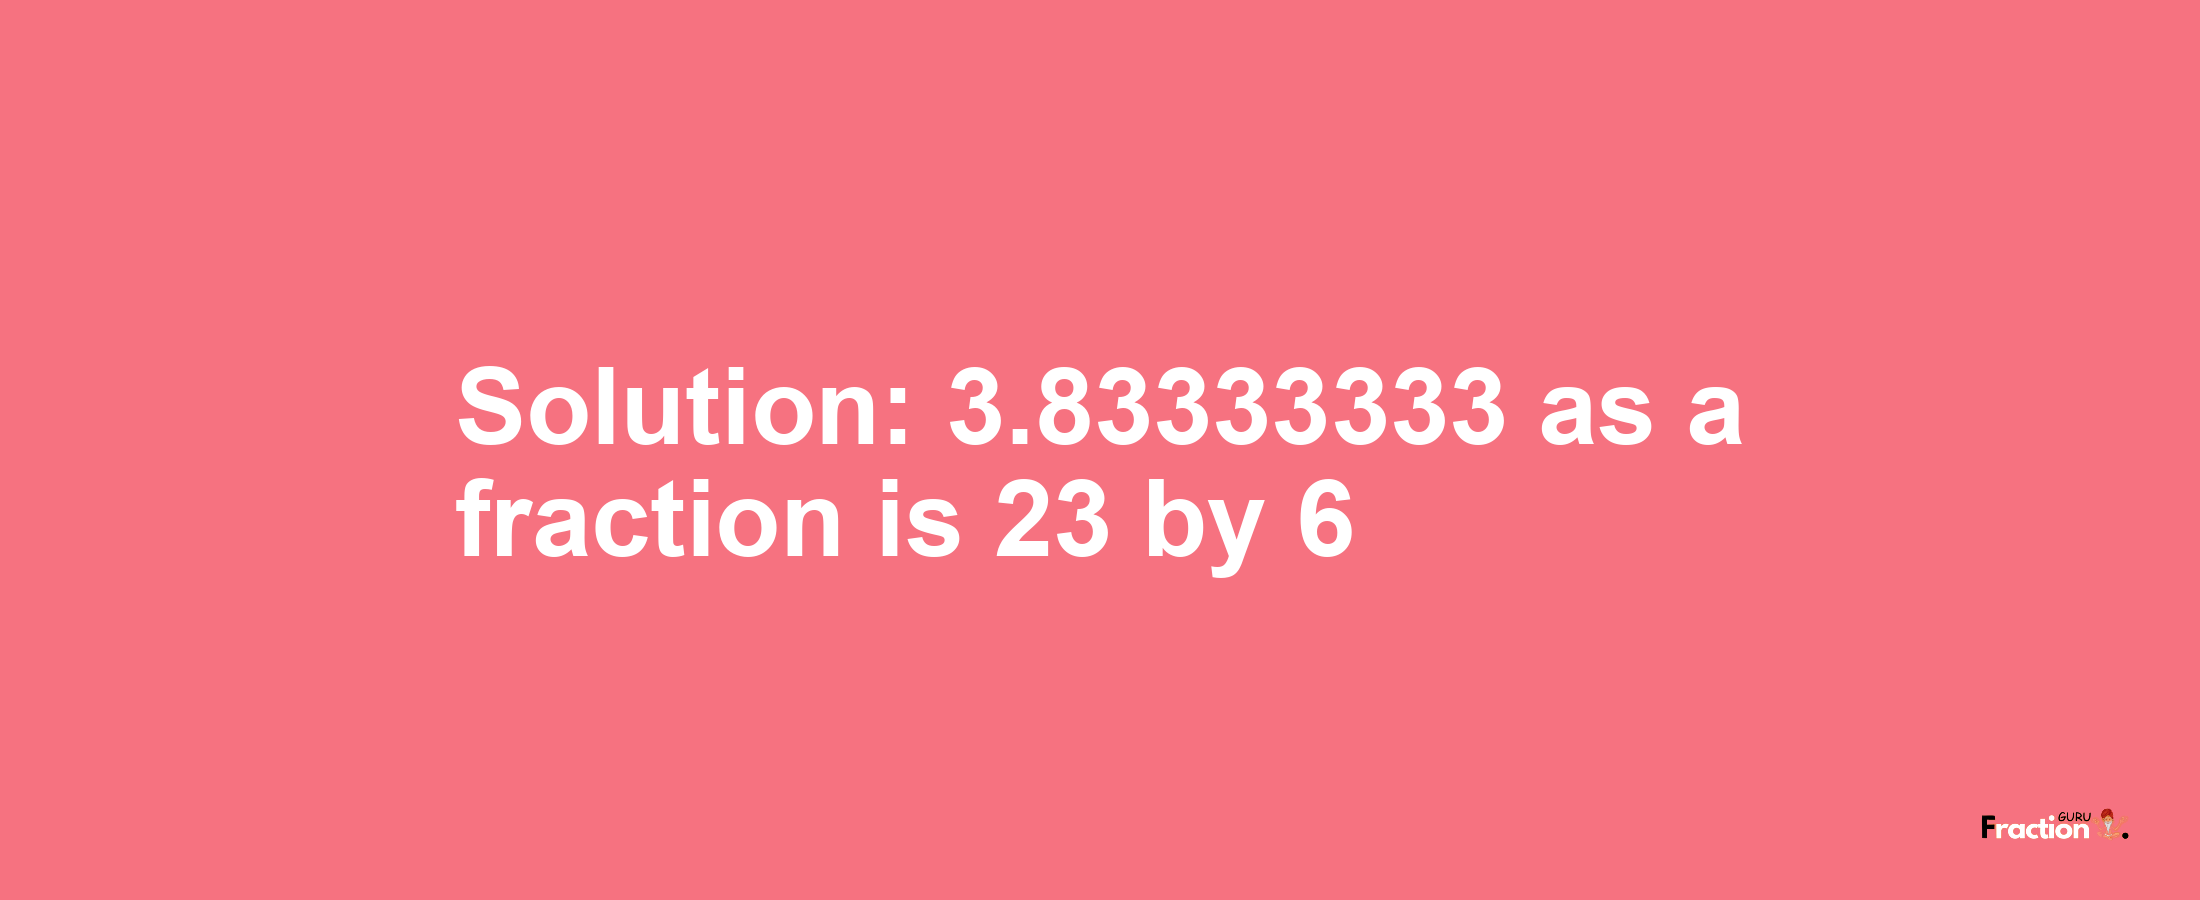 Solution:3.83333333 as a fraction is 23/6